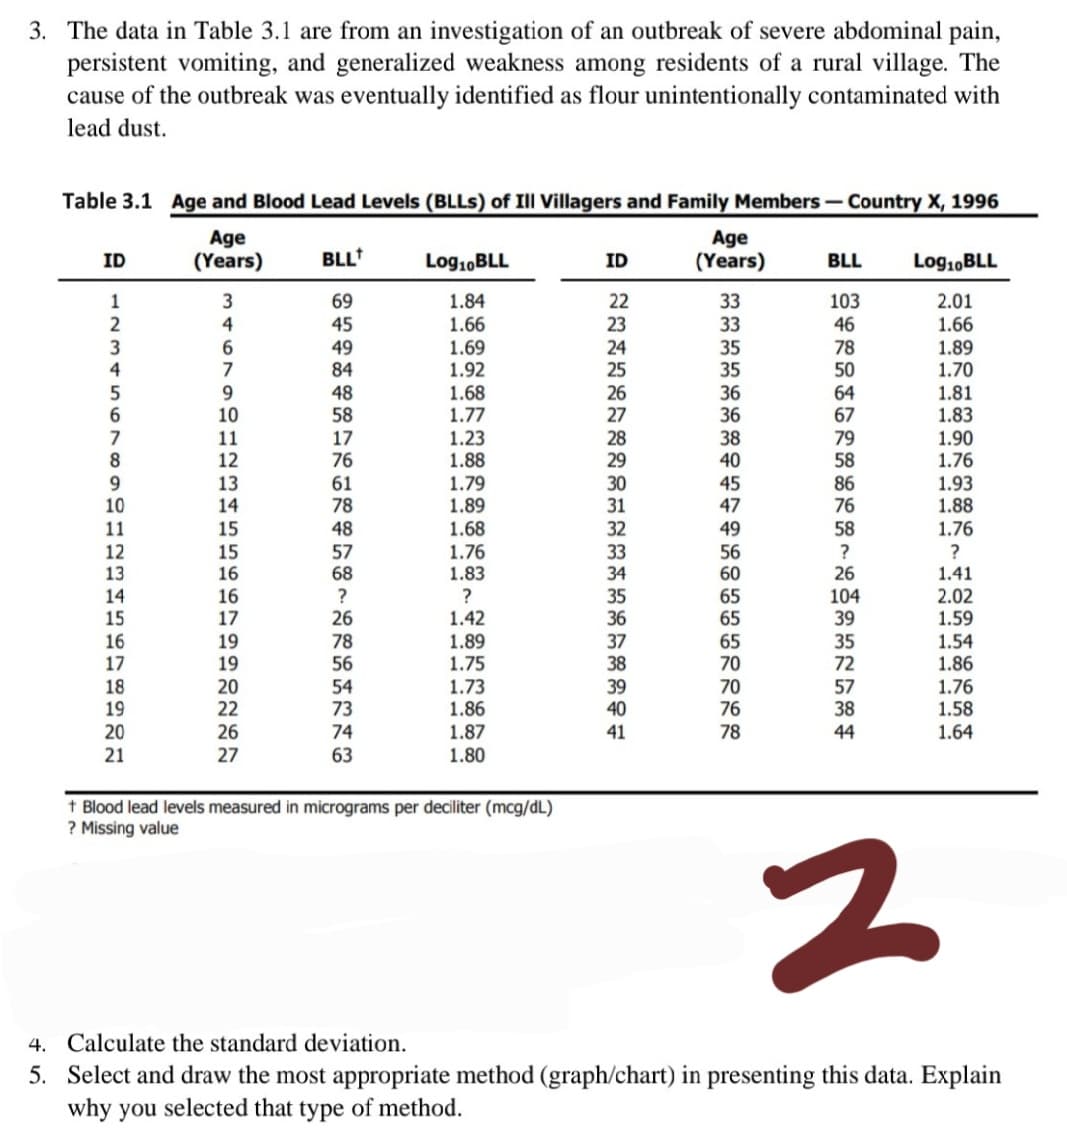 3. The data in Table 3.1 are from an investigation of an outbreak of severe abdominal pain,
persistent vomiting, and generalized weakness among residents of a rural village. The
cause of the outbreak was eventually identified as flour unintentionally contaminated with
lead dust.
Table 3.1 Age and Blood Lead Levels (BLLS) of Ill Villagers and Family Members- Country X, 1996
Age
(Years)
Age
(Years)
ID
BLL
Log10BLL
ID
BLL
Log10BLL
1.84
1.66
1.69
1.92
1.68
69
22
23
33
33
103
46
1
2.01
4
45
1.66
1.89
1.70
1.81
1.83
1.90
1.76
1.93
1.88
1.76
6.
7
49
84
24
25
35
35
78
50
4
9.
10
48
26
27
36
36
64
67
6.
58
1.77
7
1.23
1.88
28
29
30
31
38
40
79
58
11
17
8.
12
76
13
14
1.79
1.89
1.68
1.76
9.
10
61
78
45
86
76
47
11
15
48
32
49
58
12
15
57
68
33
34
56
60
?
26
13
16
1.83
1.41
14
16
17
35
36
65
65
104
39
35
72
2.02
1.42
1.89
1.75
1.73
1.86
15
26
1.59
16
17
19
19
78
56
37
38
65
70
1.54
18
19
20
22
54
73
39
40
70
76
57
38
1.86
1.76
1.58
20
21
26
27
1.87
1.80
74
41
78
44
1.64
63
t Blood lead levels measured in micrograms per deciliter (mcg/dL)
? Missing value
4. Calculate the standard deviation.
5. Select and draw the most appropriate method (graph/chart) in presenting this data. Explain
why you selected that type of method.
